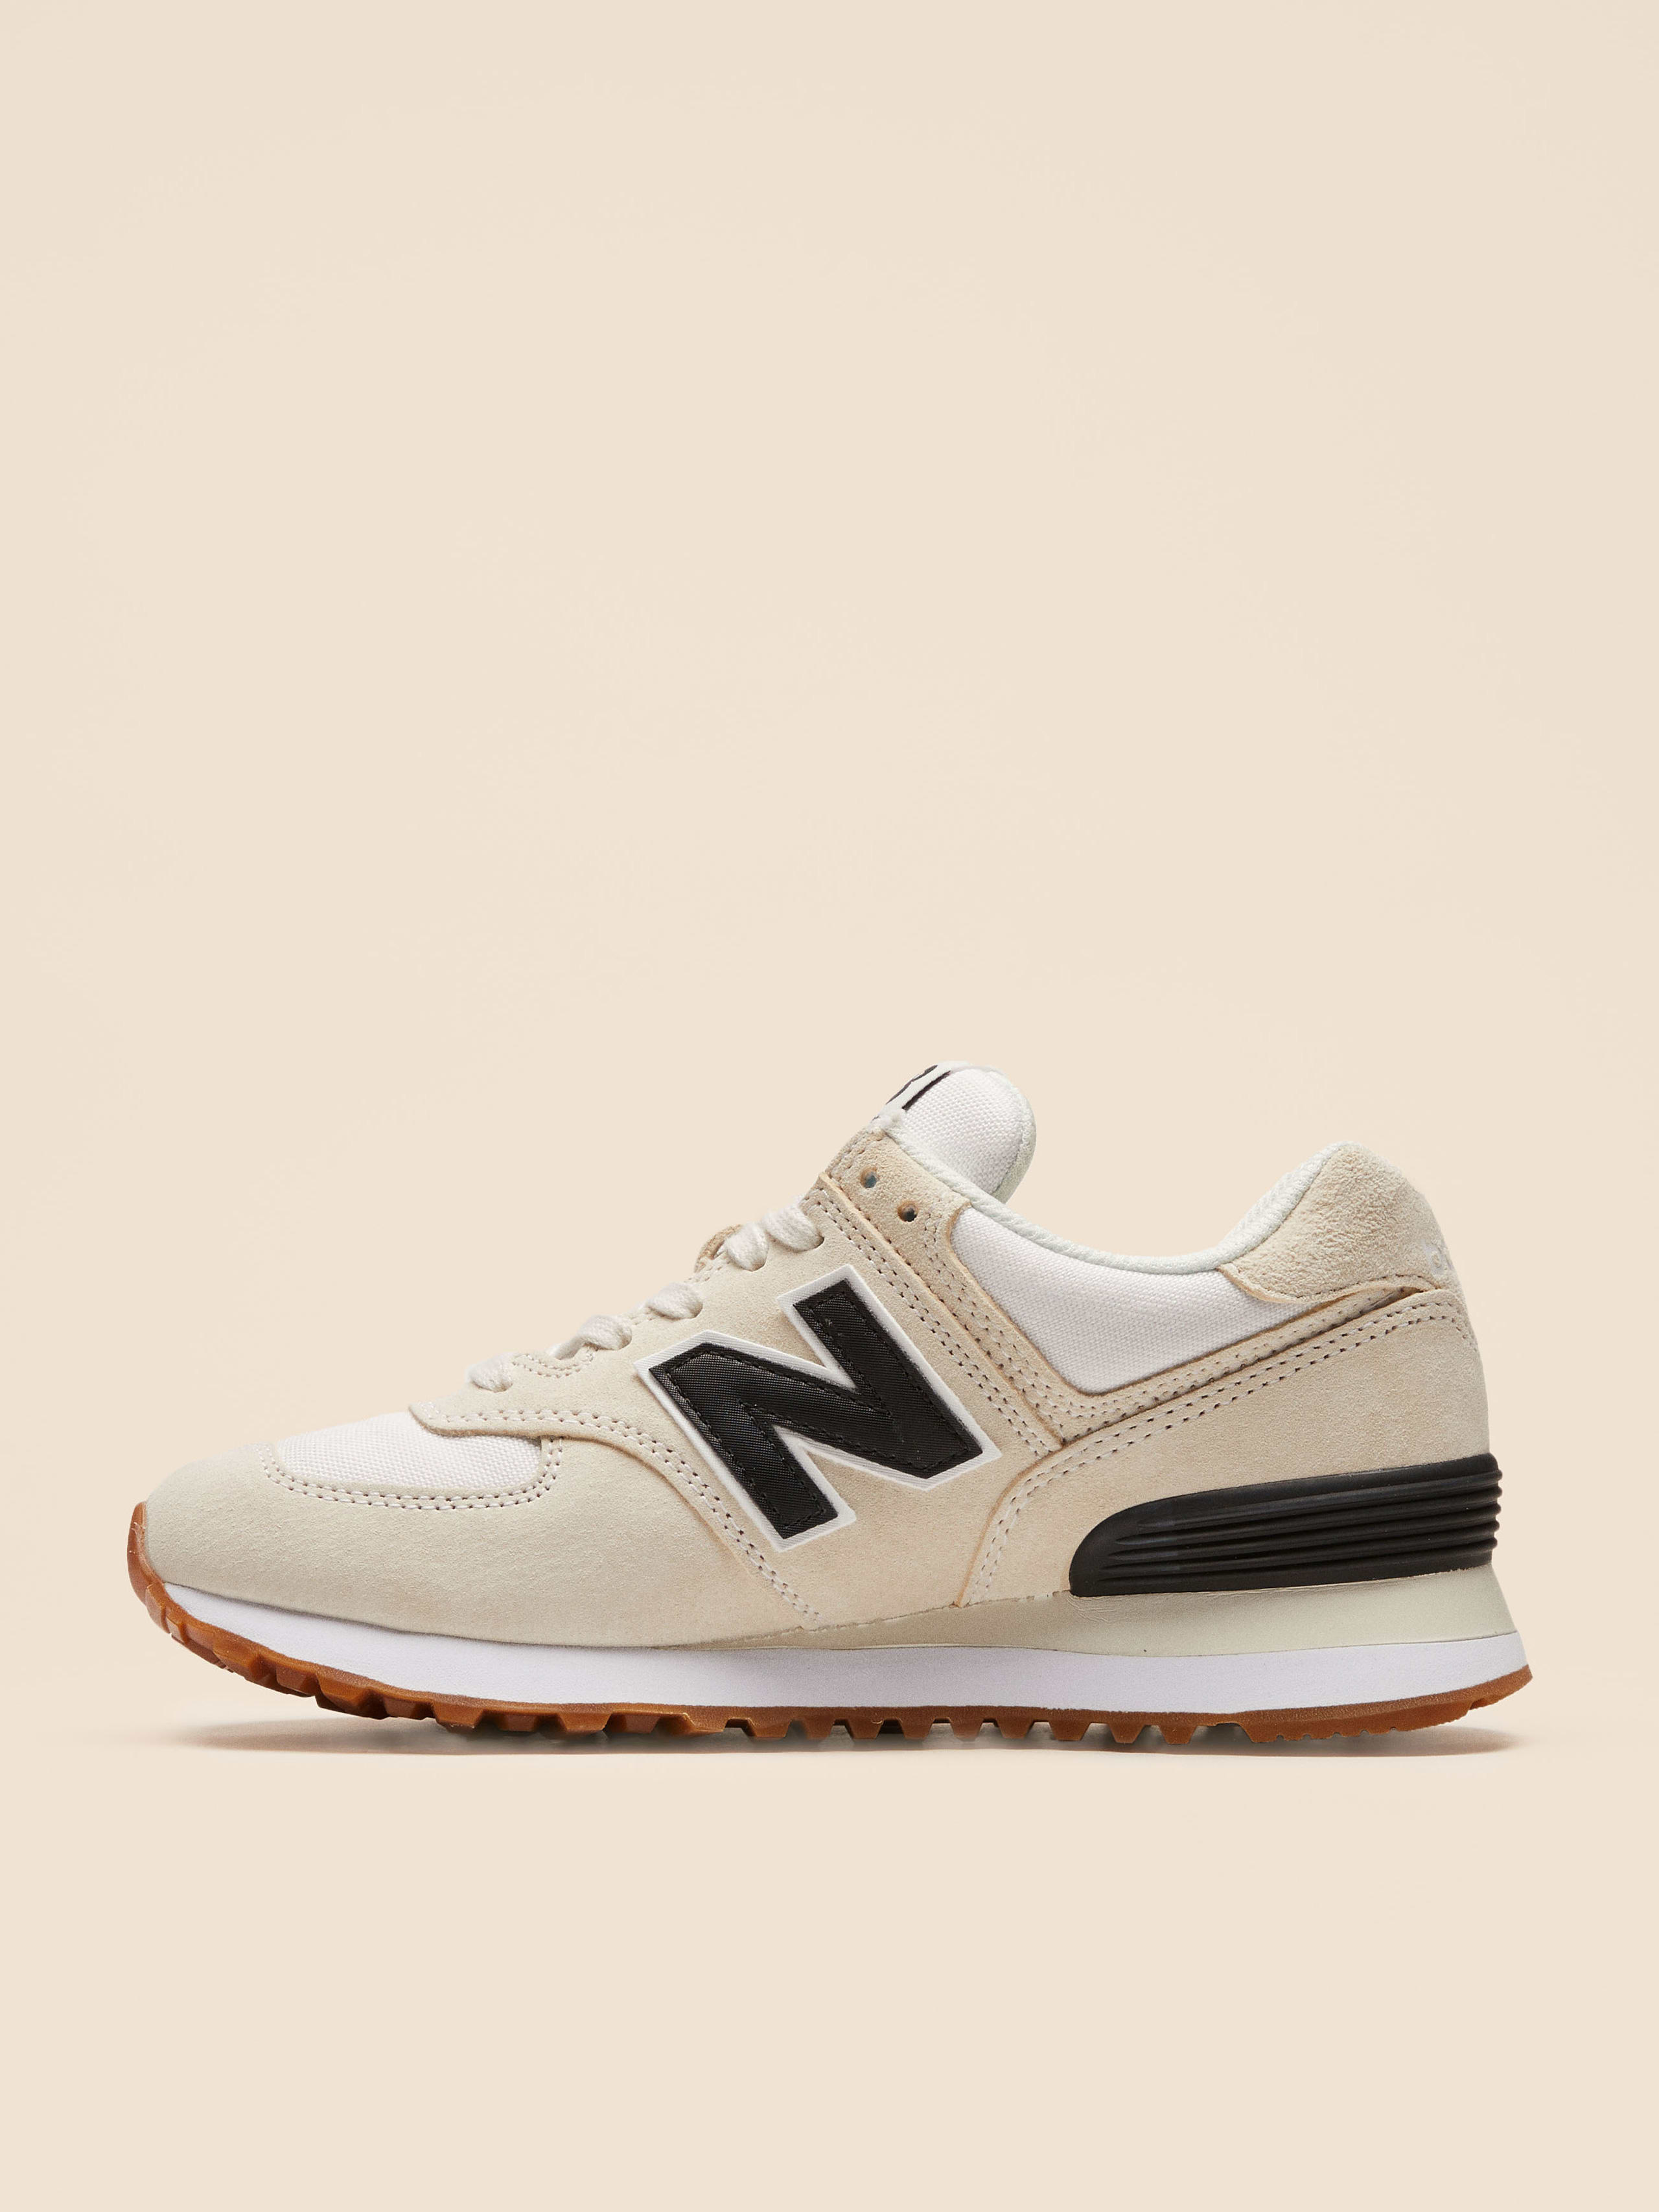 New Balance X Reformation 574 Sneakers - Sustainable Shoes | Reformation